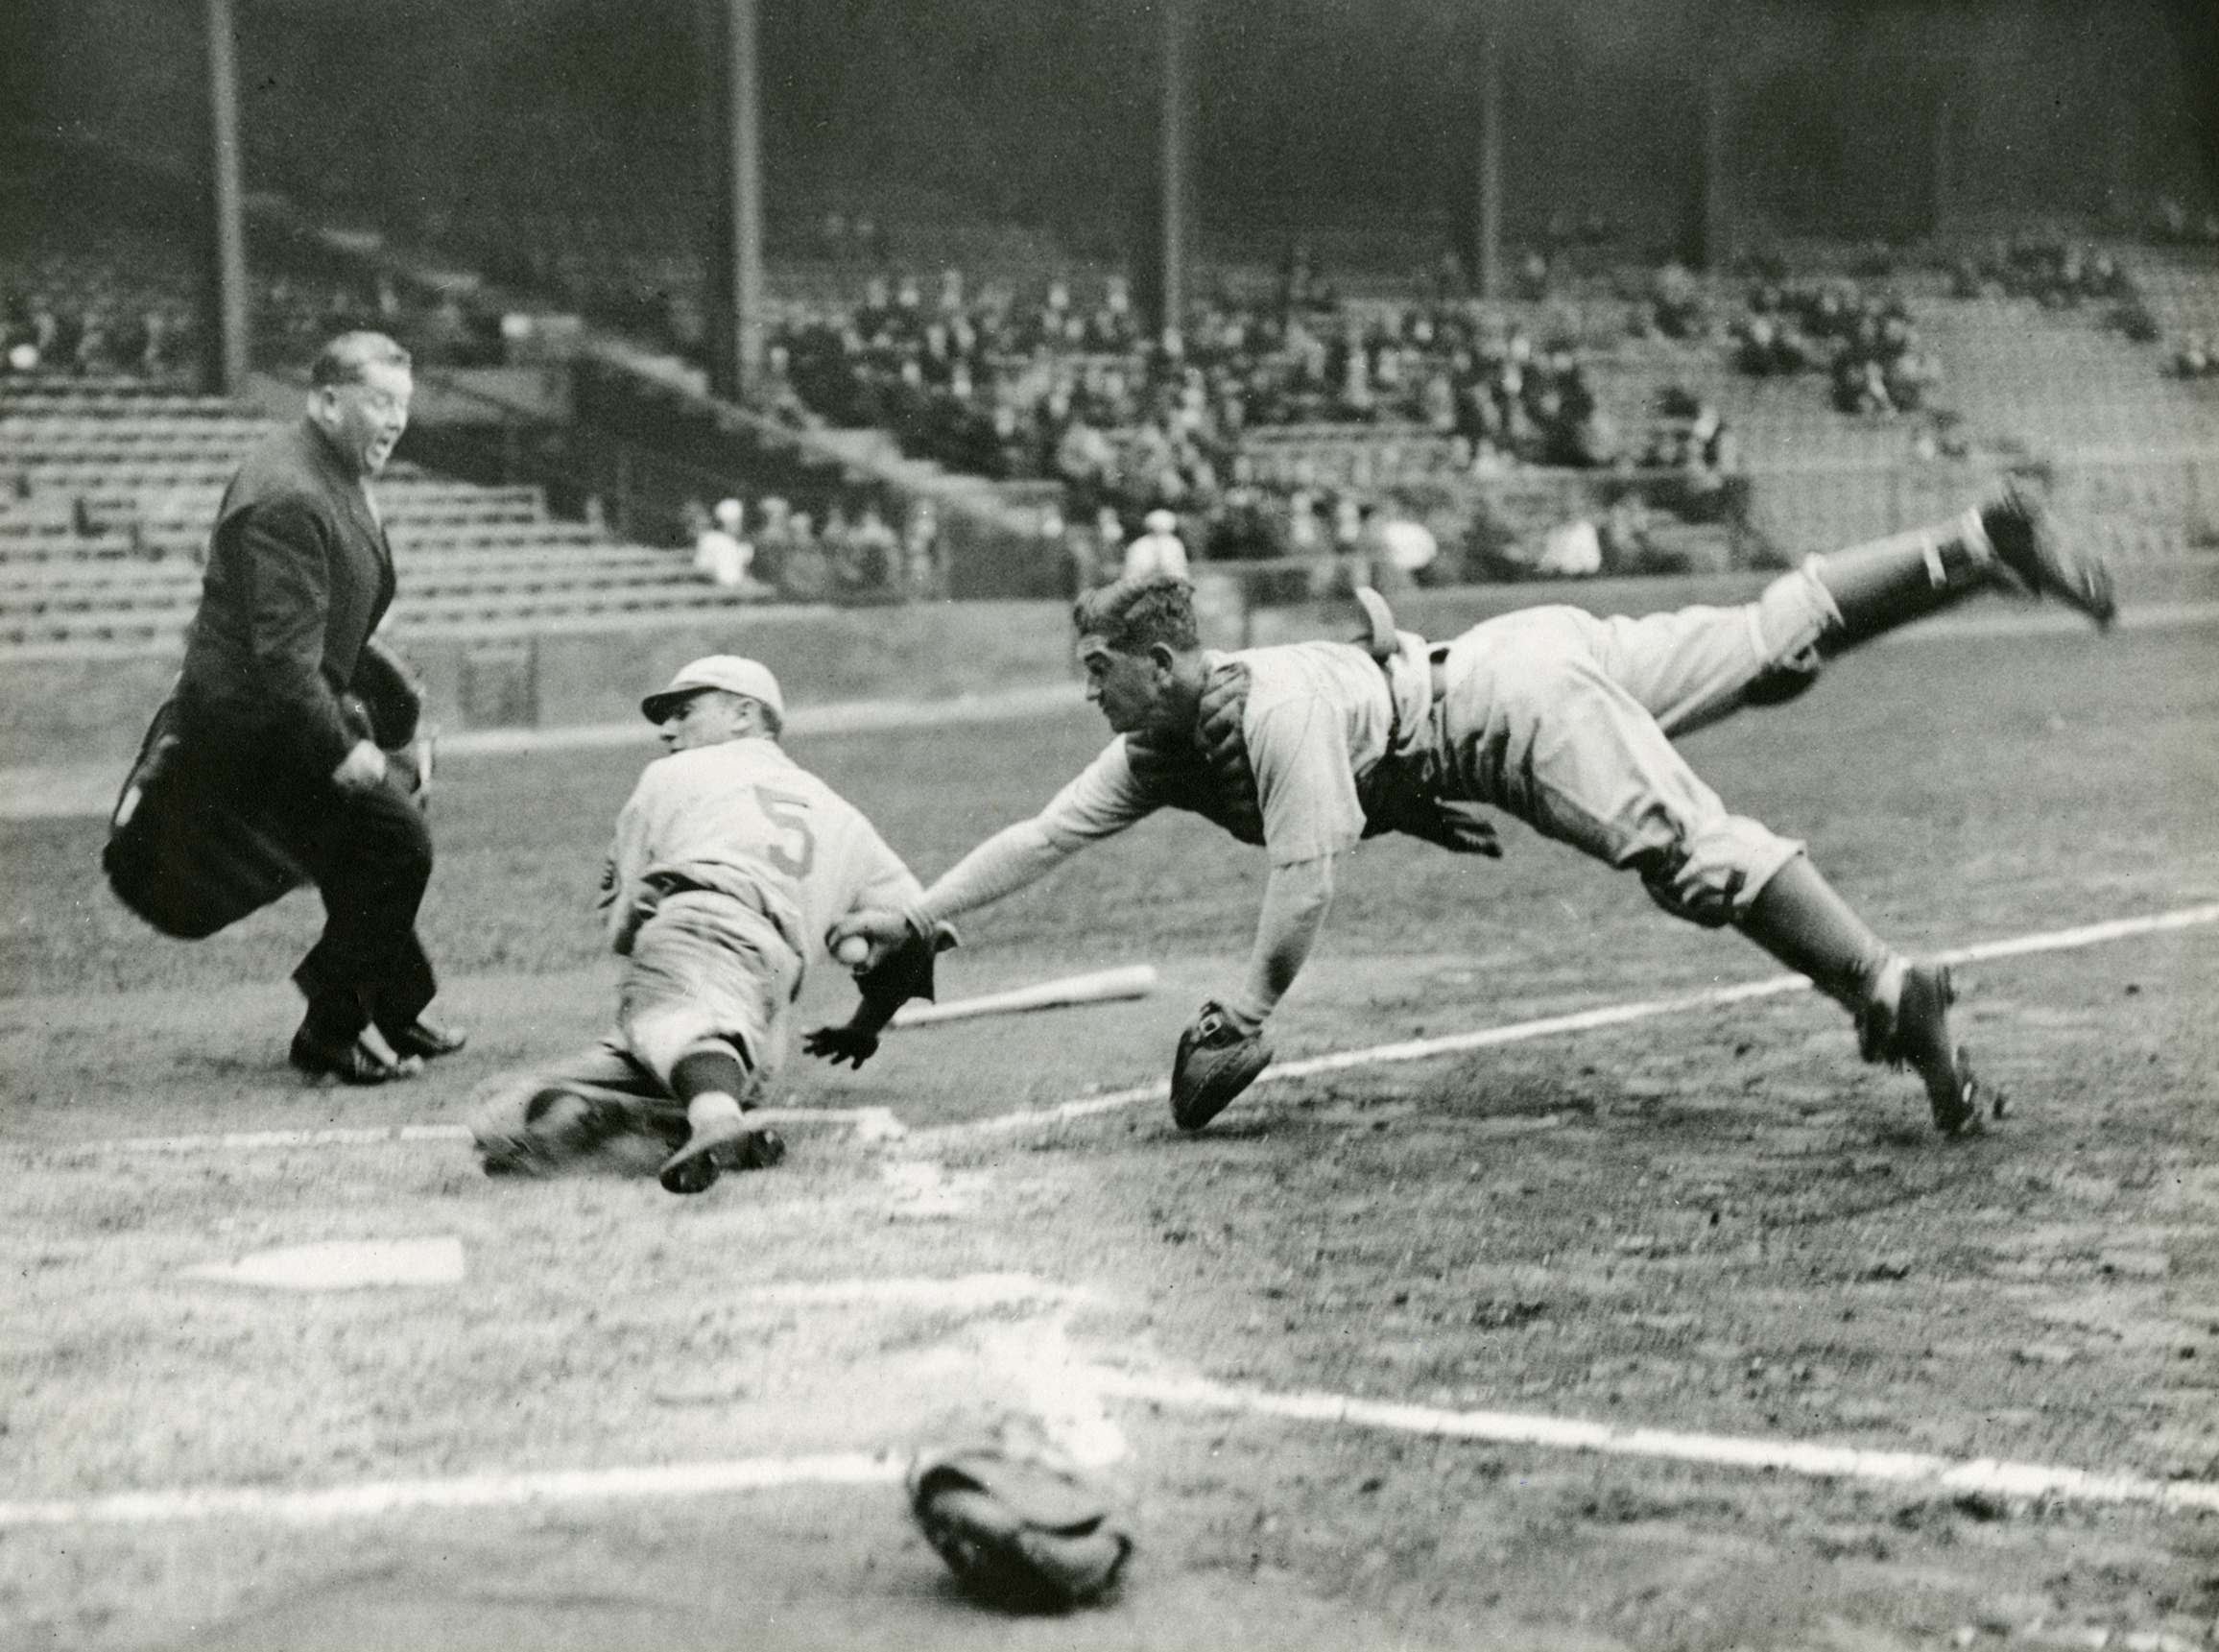 As part of the annual preseason City Series between Philadelphia's two major league clubs, Athletics catcher Mickey Cochrane dives home and tags out Phillies base runner Pinky Whitney at Shibe Park in Philadelphia, April 1, 1933.